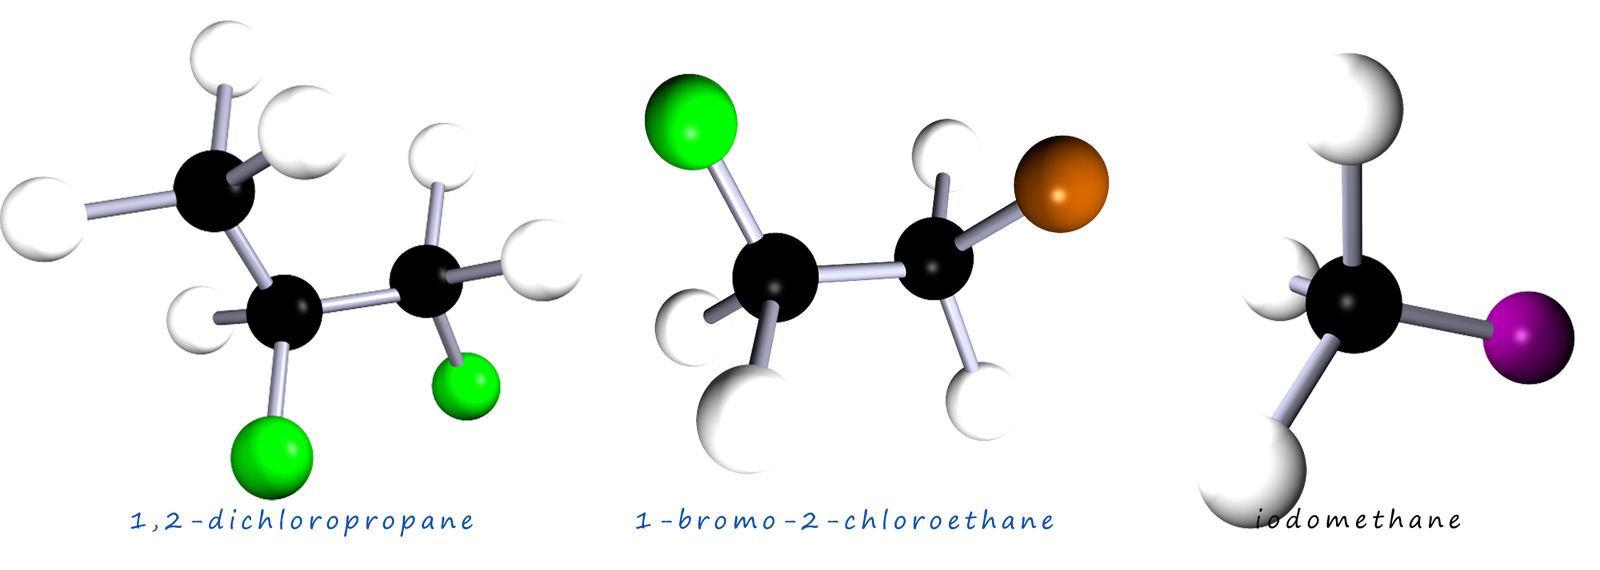 Examples of disubstituted halogenalkane molcules.  3d model and formula all given.